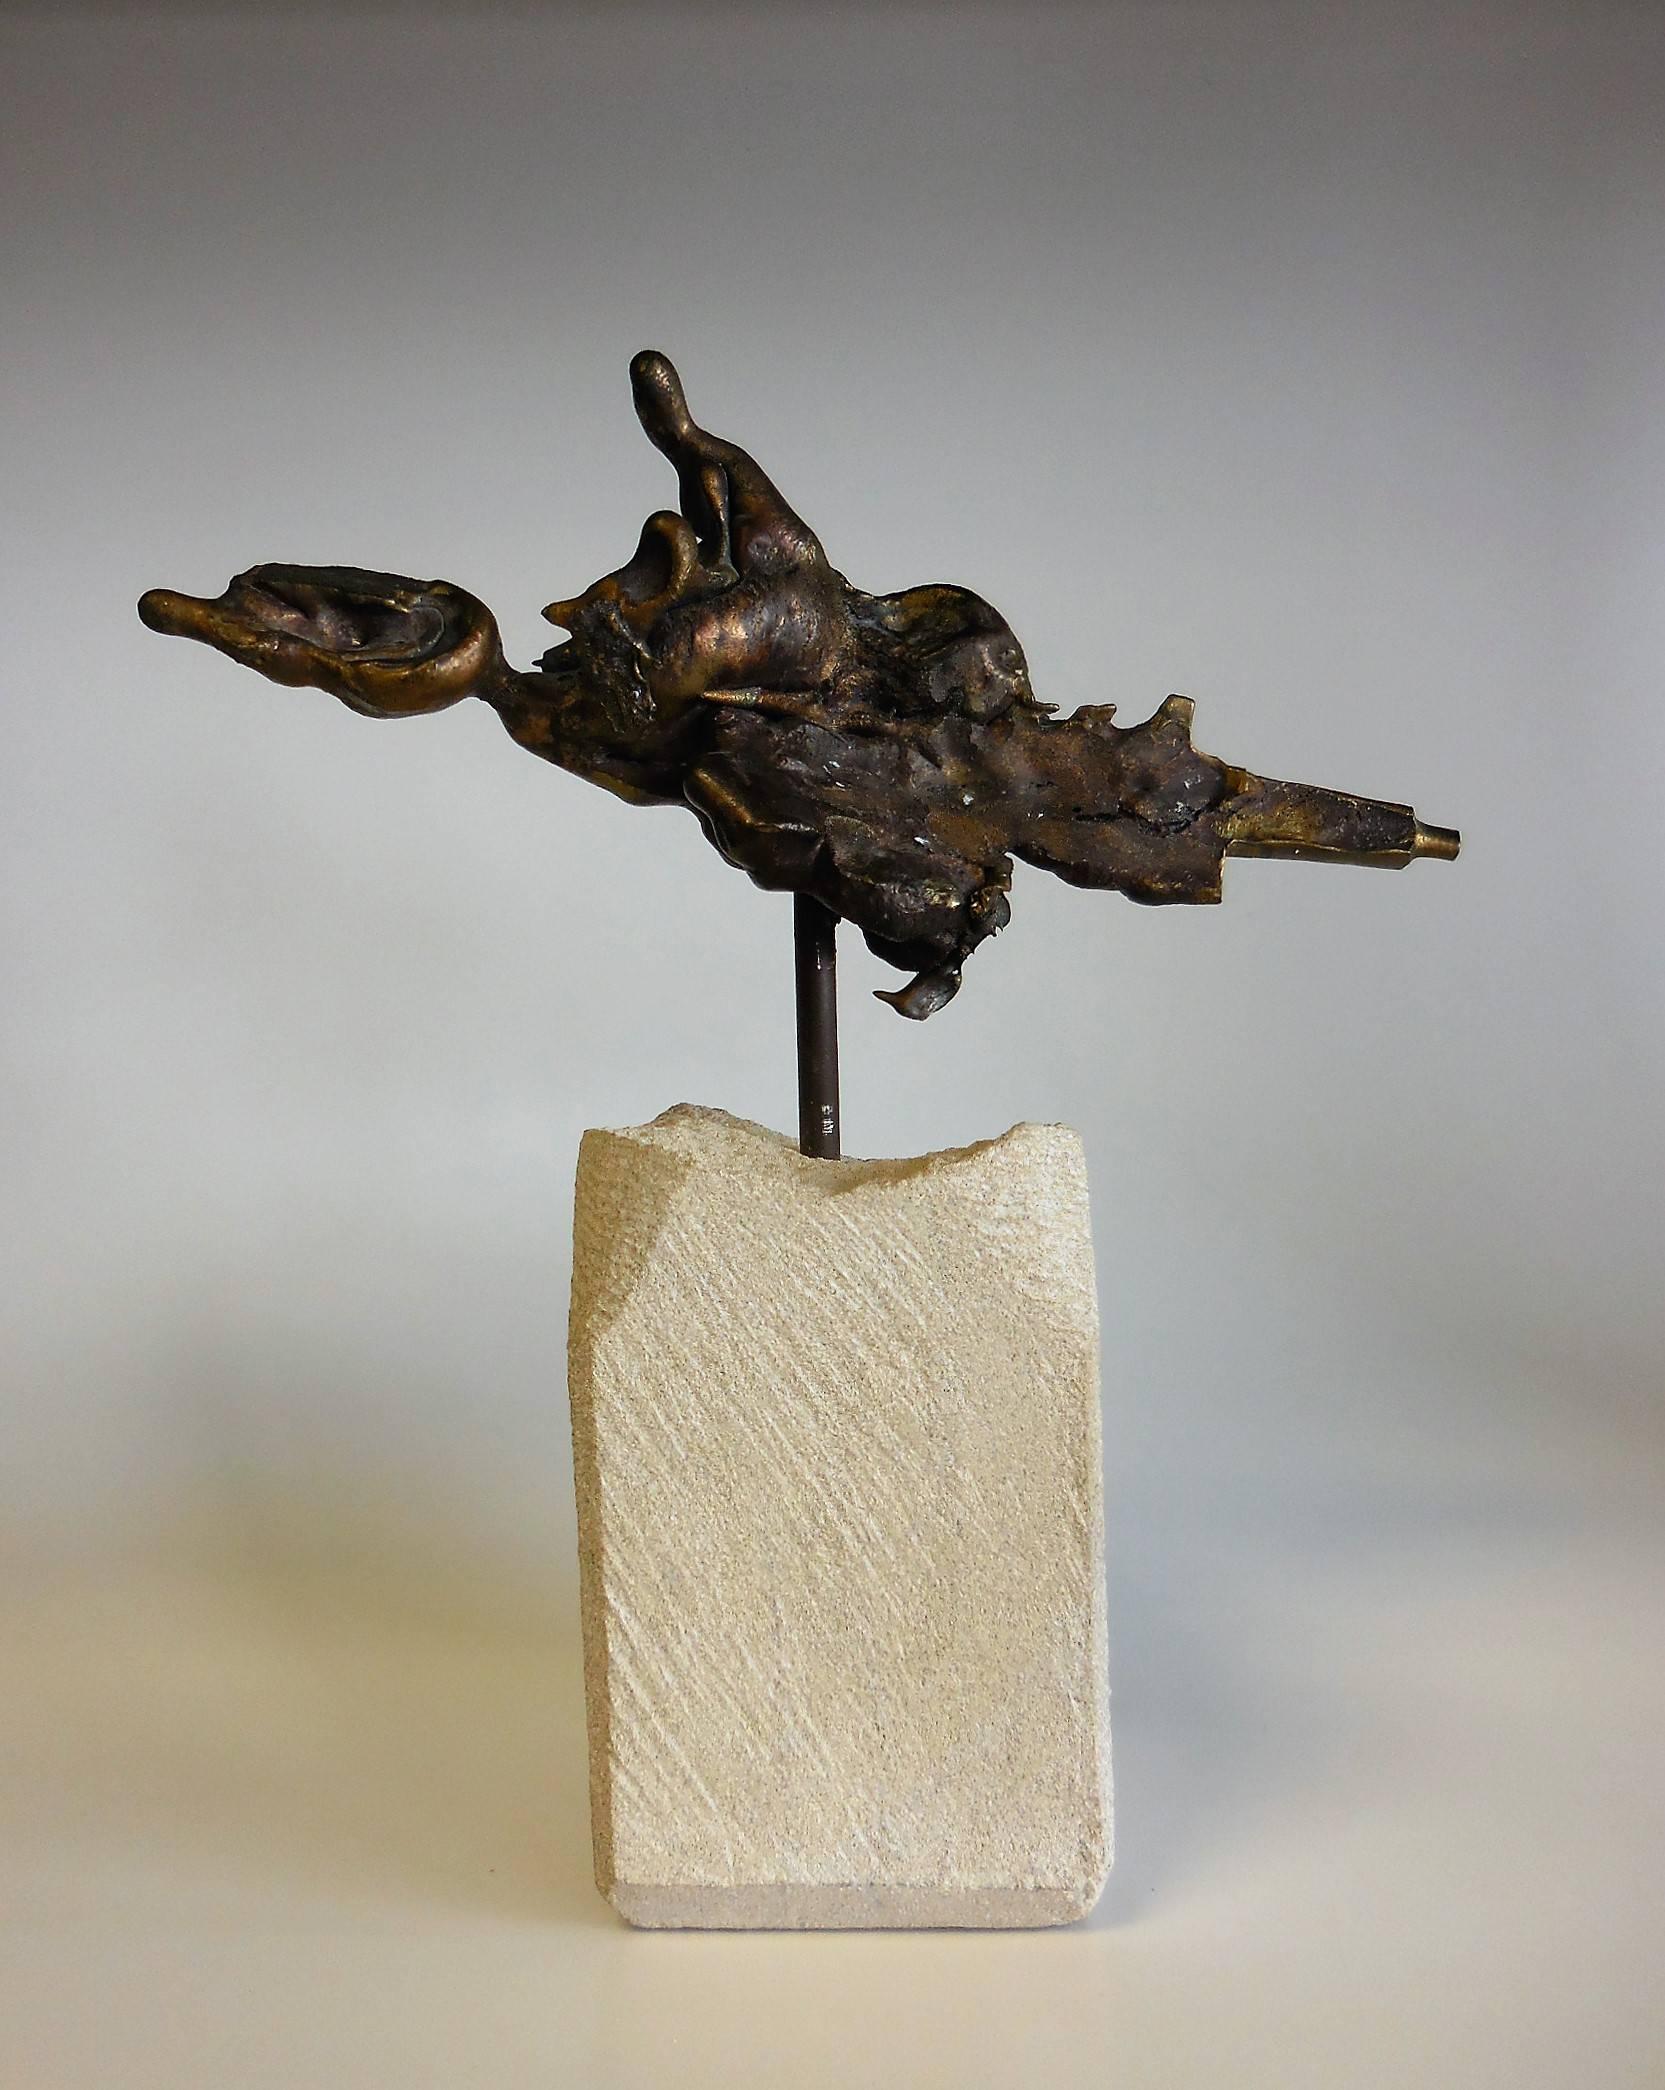 An abstract bronze sculpture mounted on a stone base.